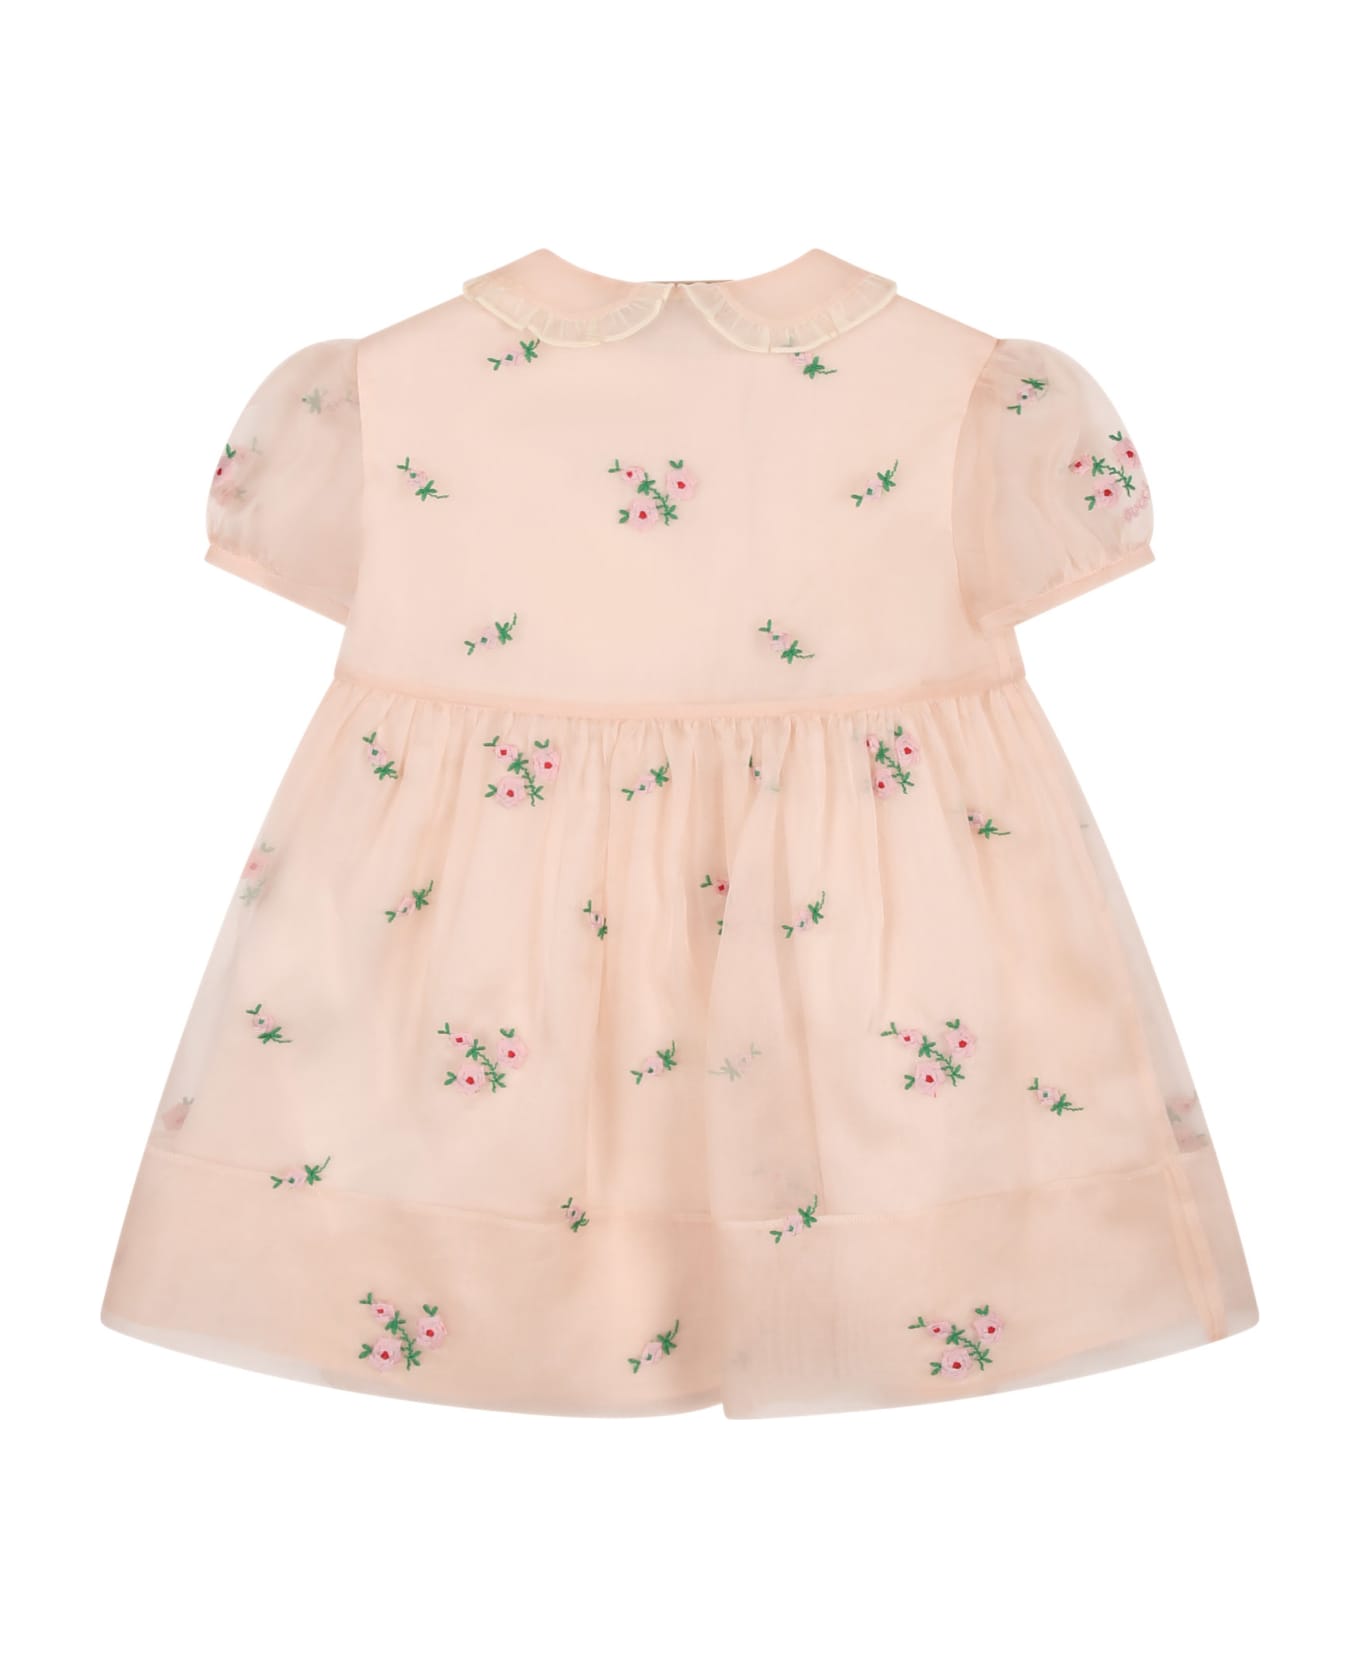 Gucci Pink Dress For Baby Girl With All-over Embroidered Roses - Pink